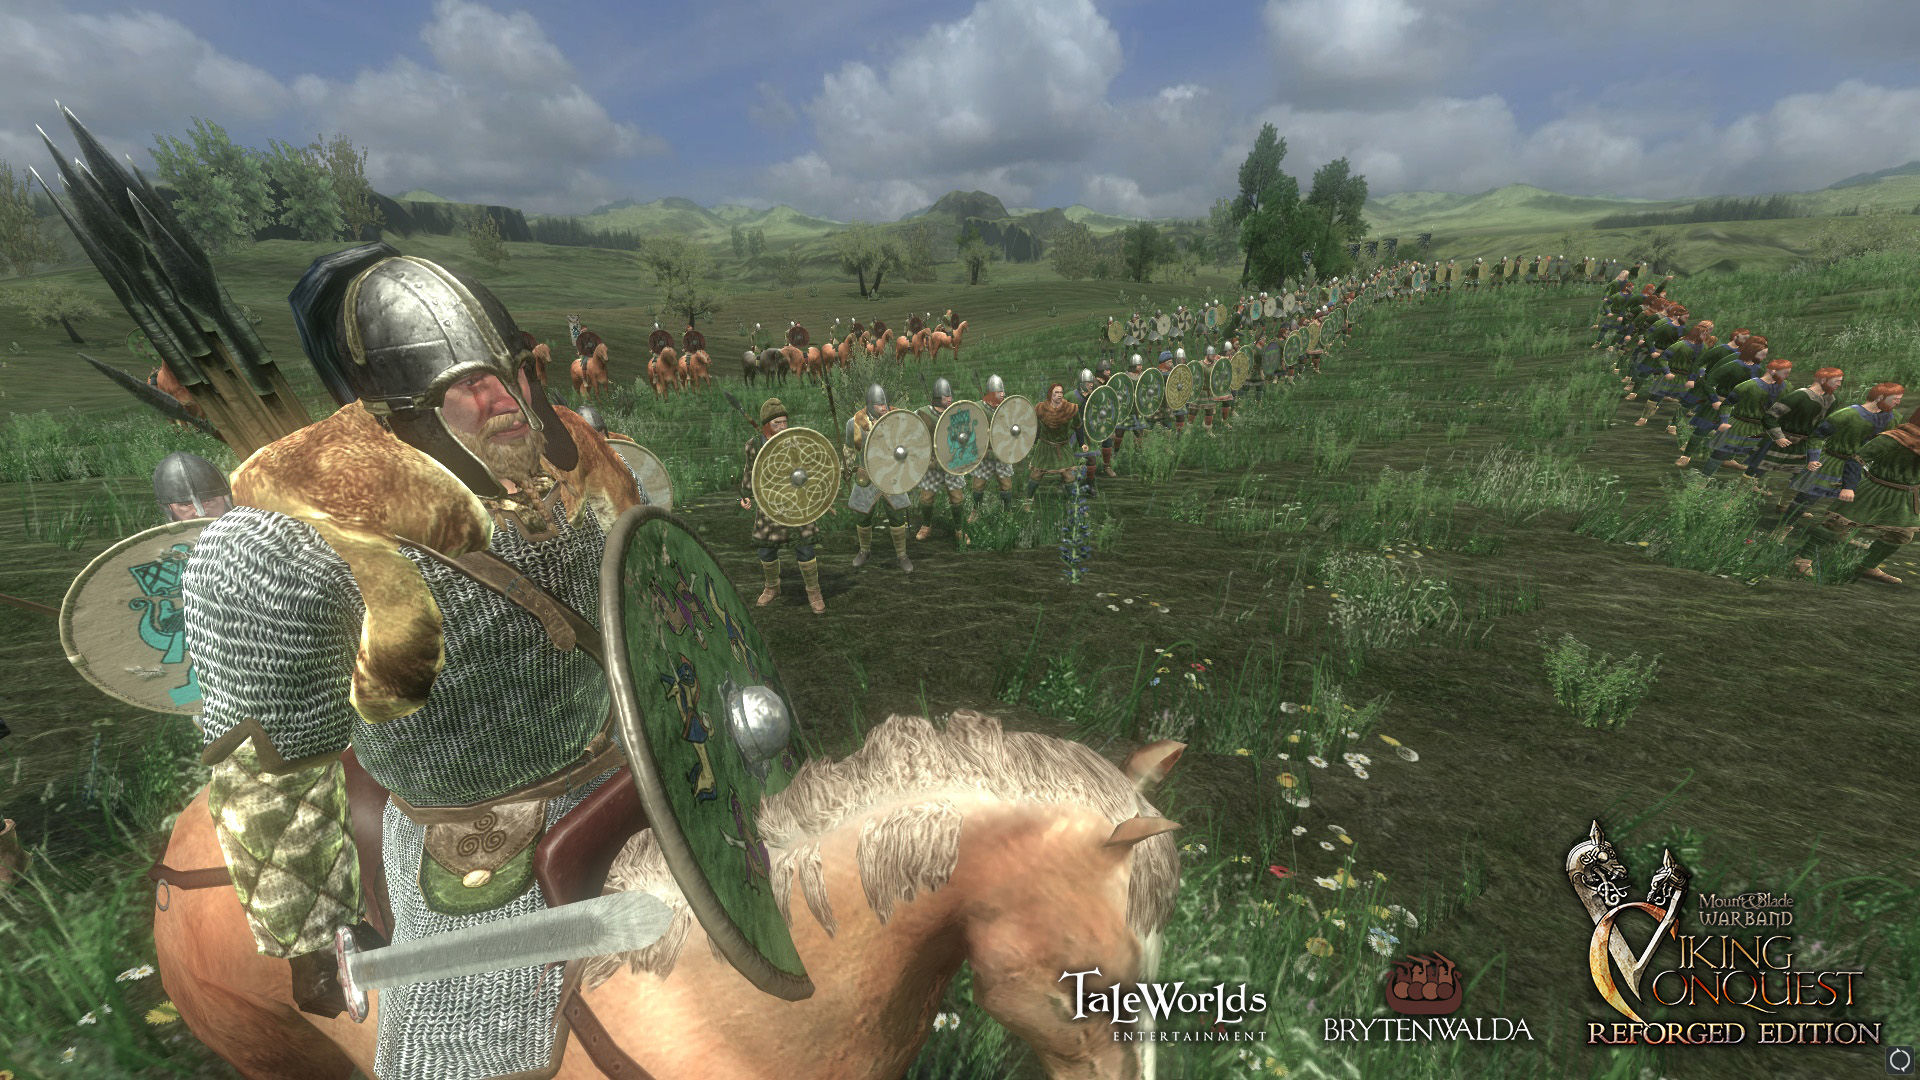 how to mod mount and blade warband steam